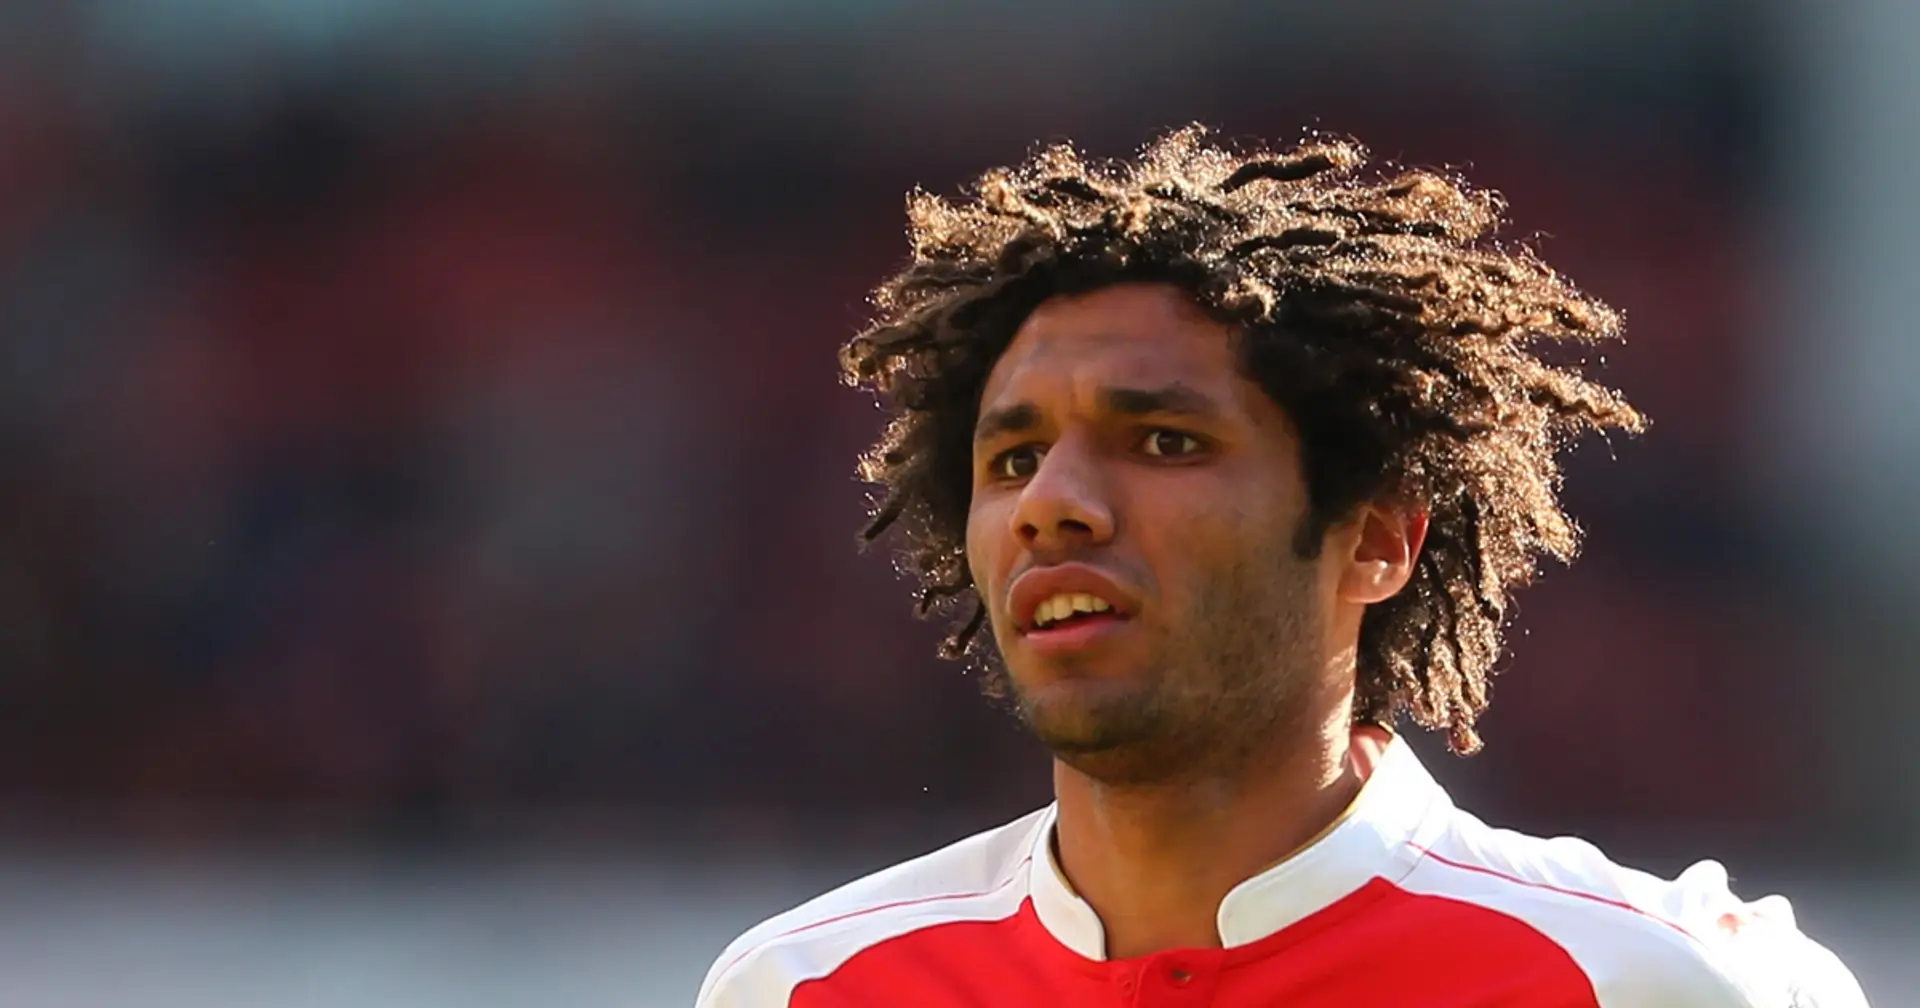 Mo Elneny sends ambitious Twitter message after impressive display vs MK Dons